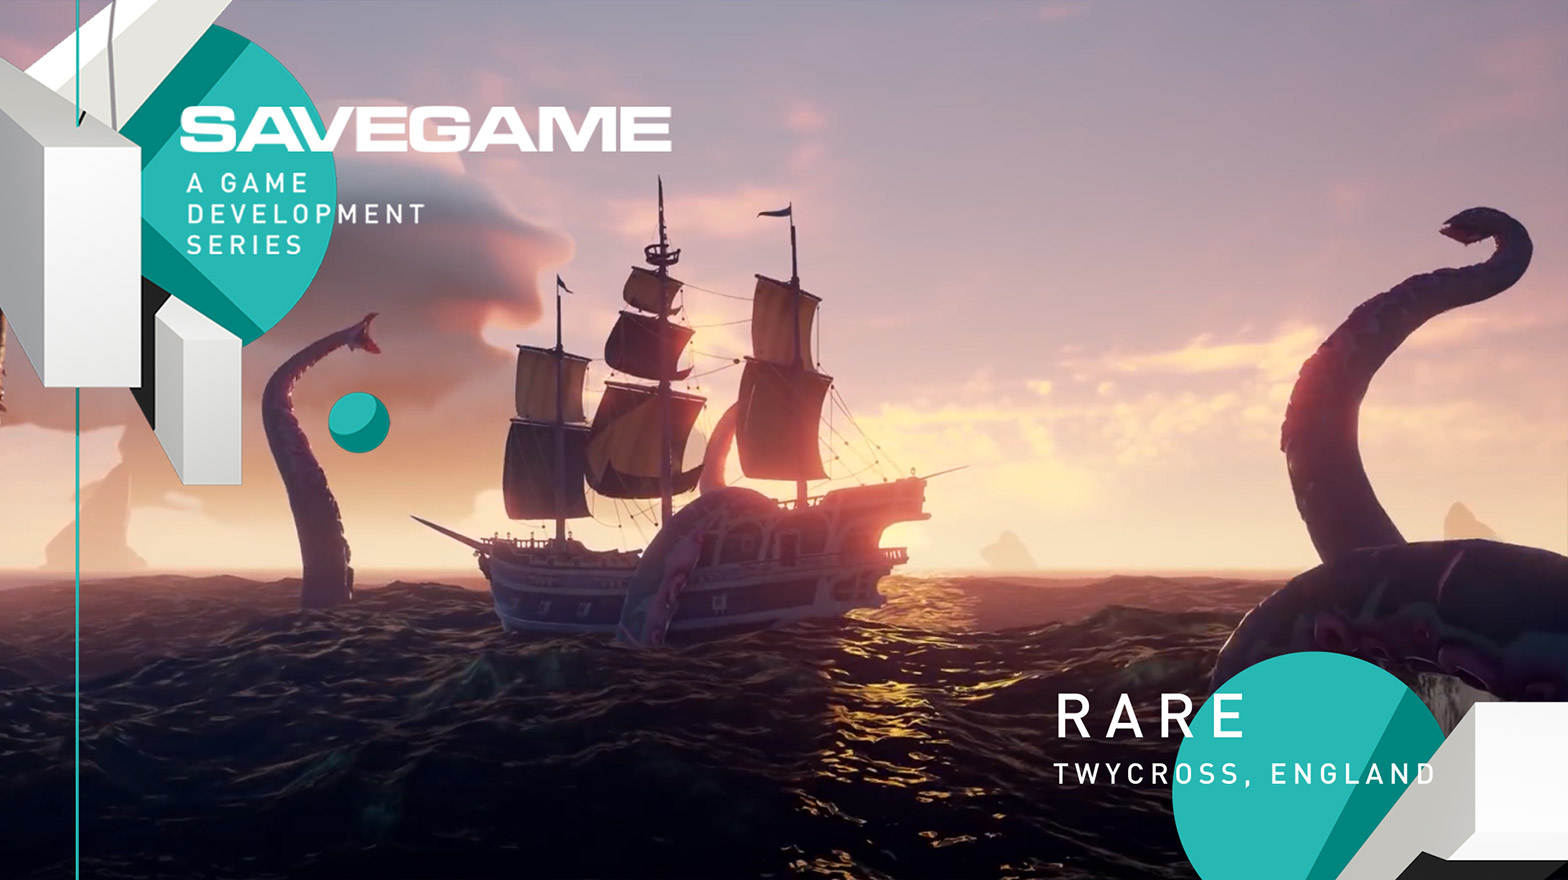 "Save Game A Development Series Rare Twycross, England" text with image of colonial ship fighting a giant octopus in the ocean